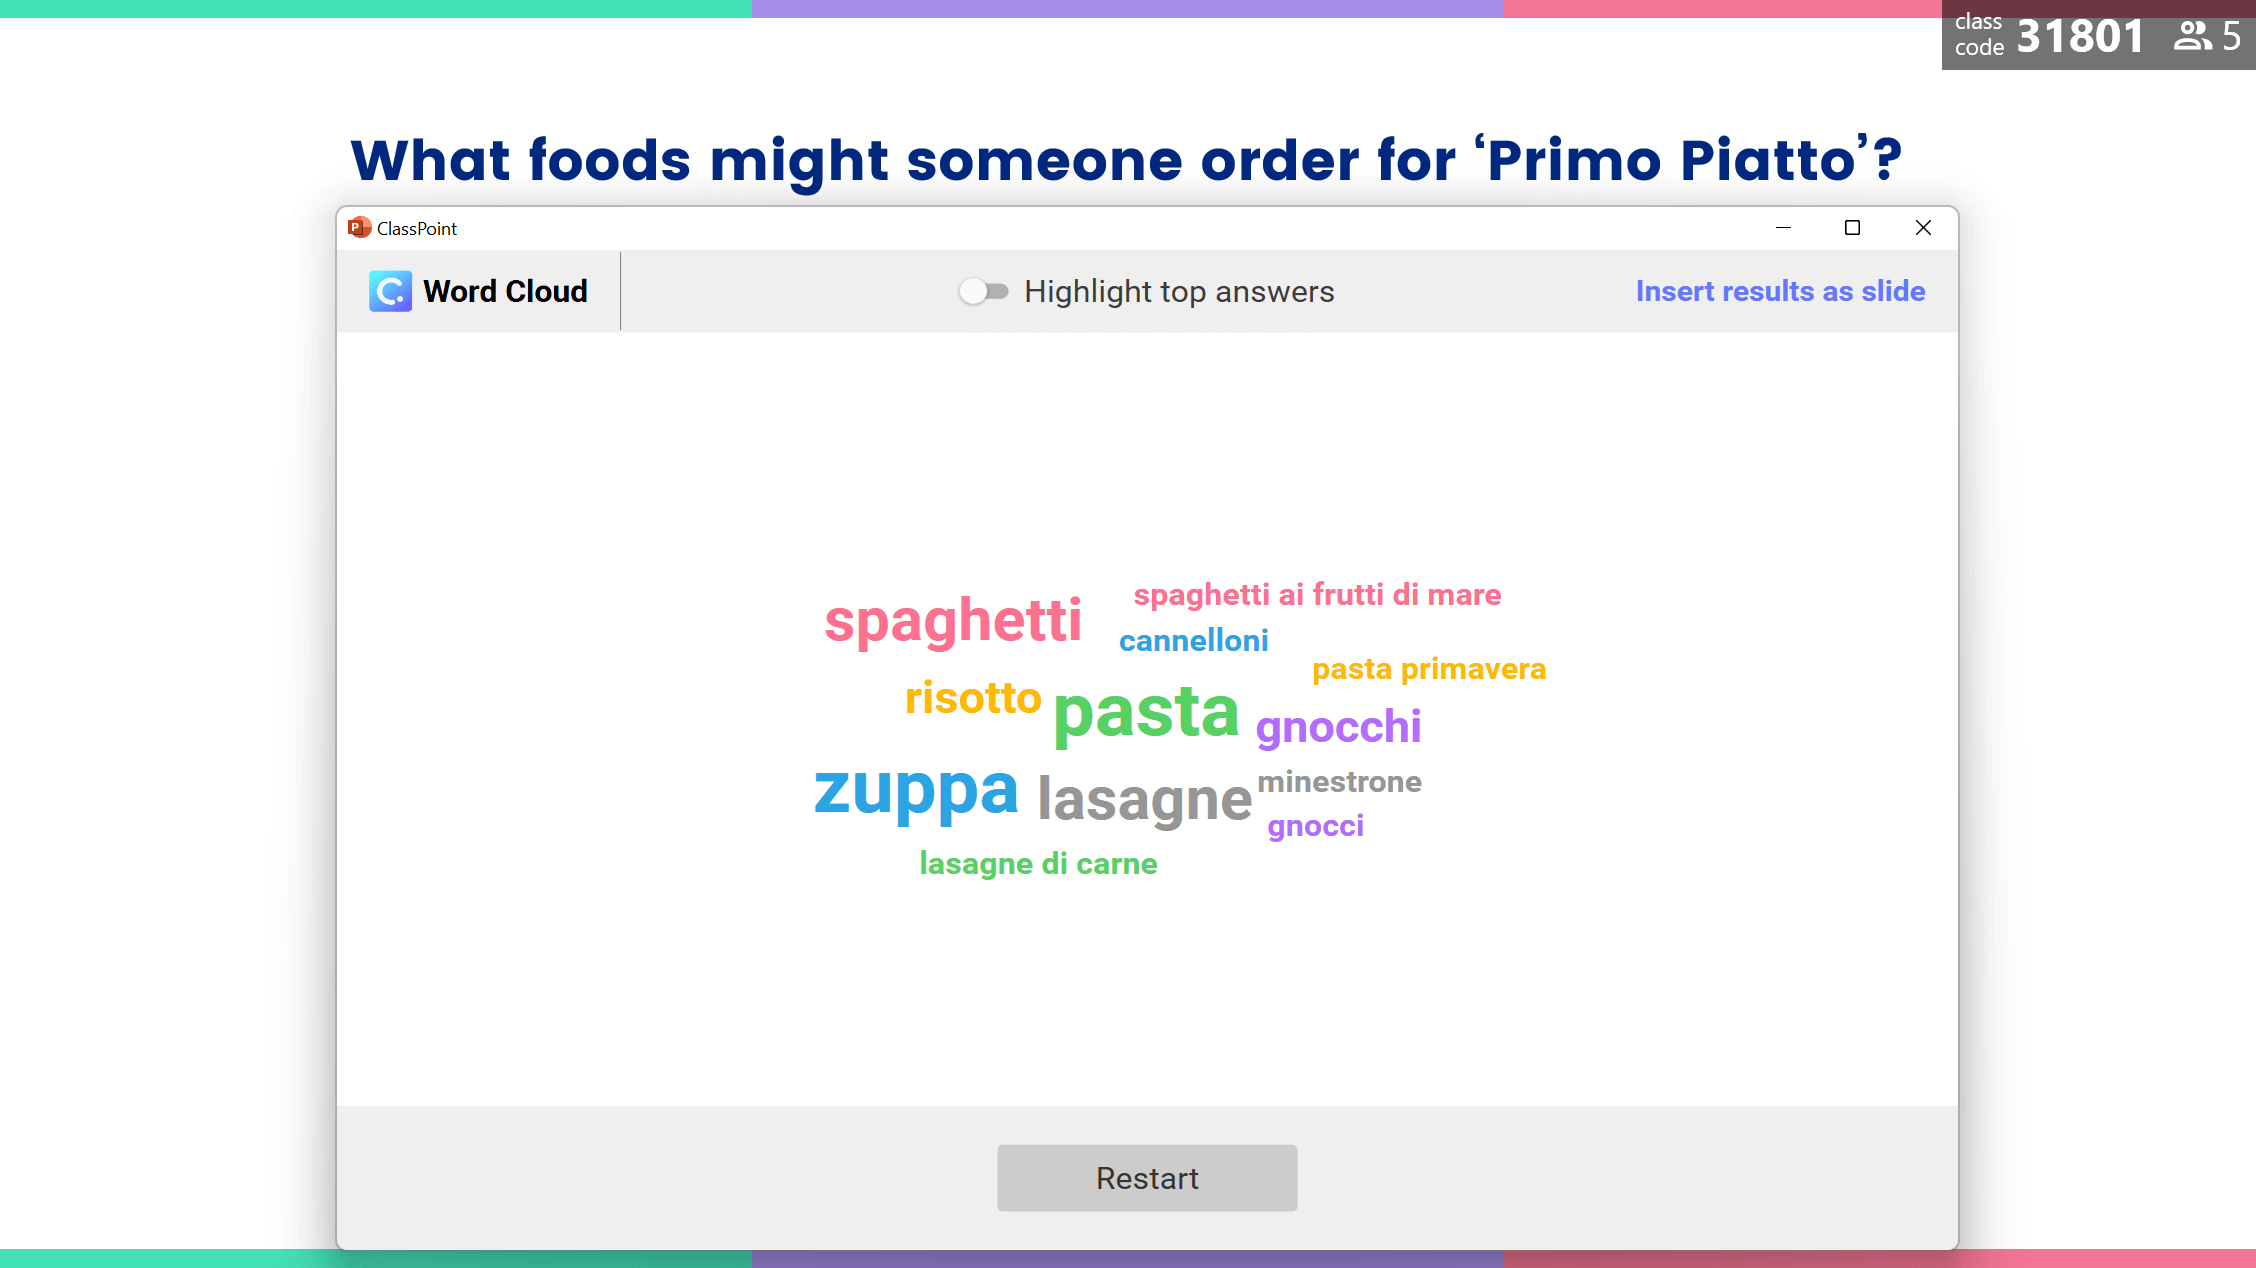 Word Cloud activities: What are Primo Piatto italian foods?